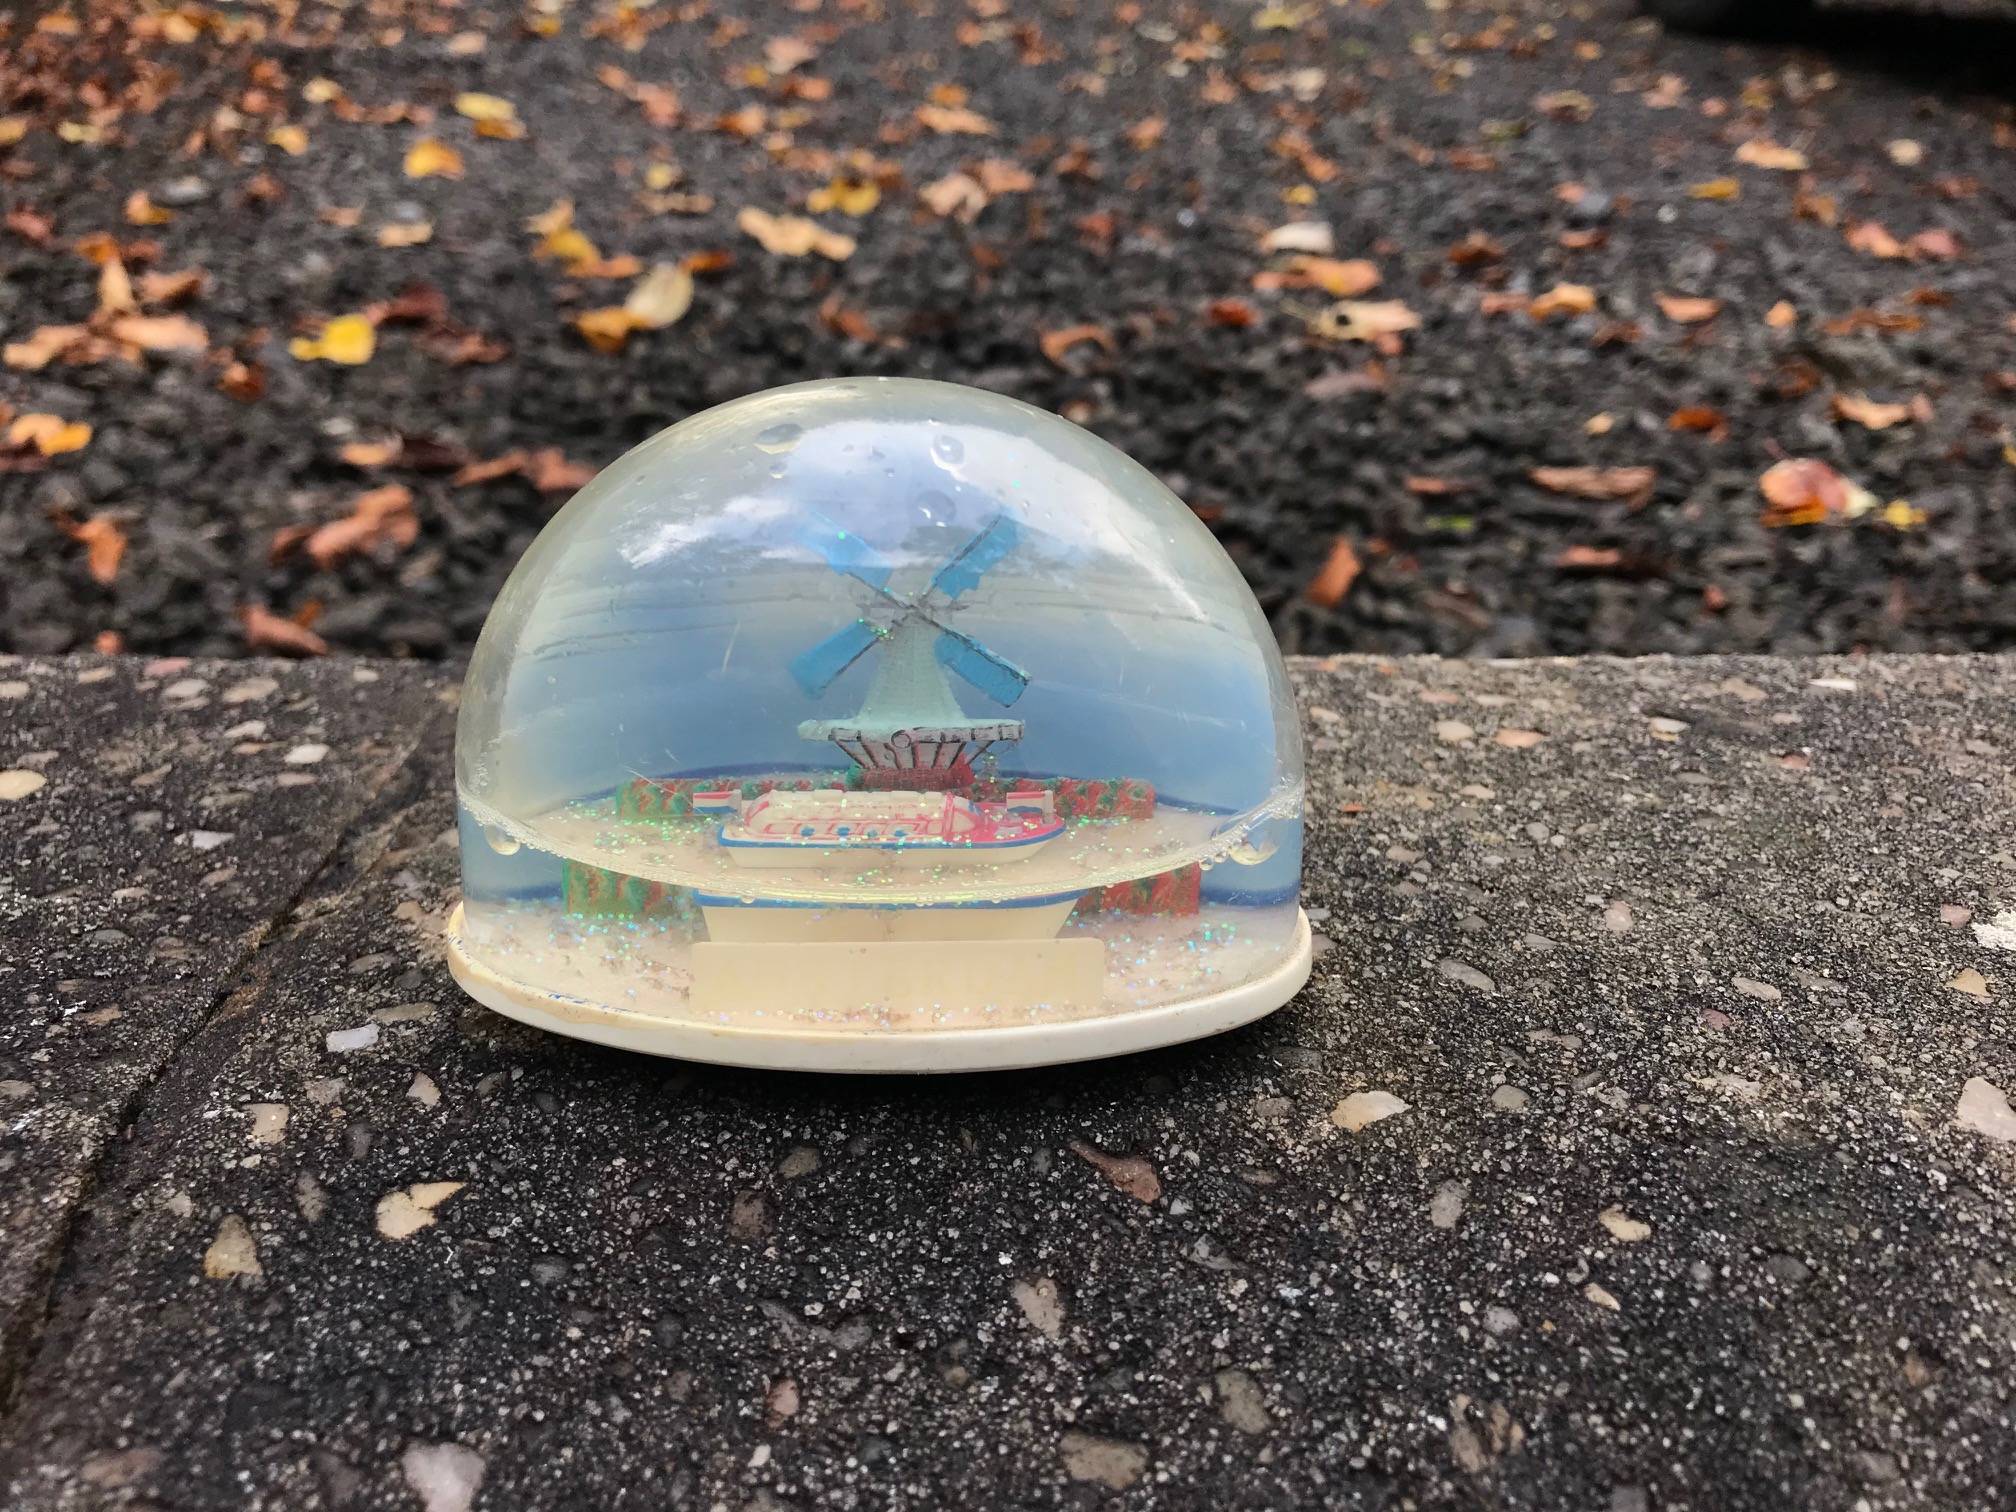 Amsterdam Snow Globe from a Collection of Snow Globes